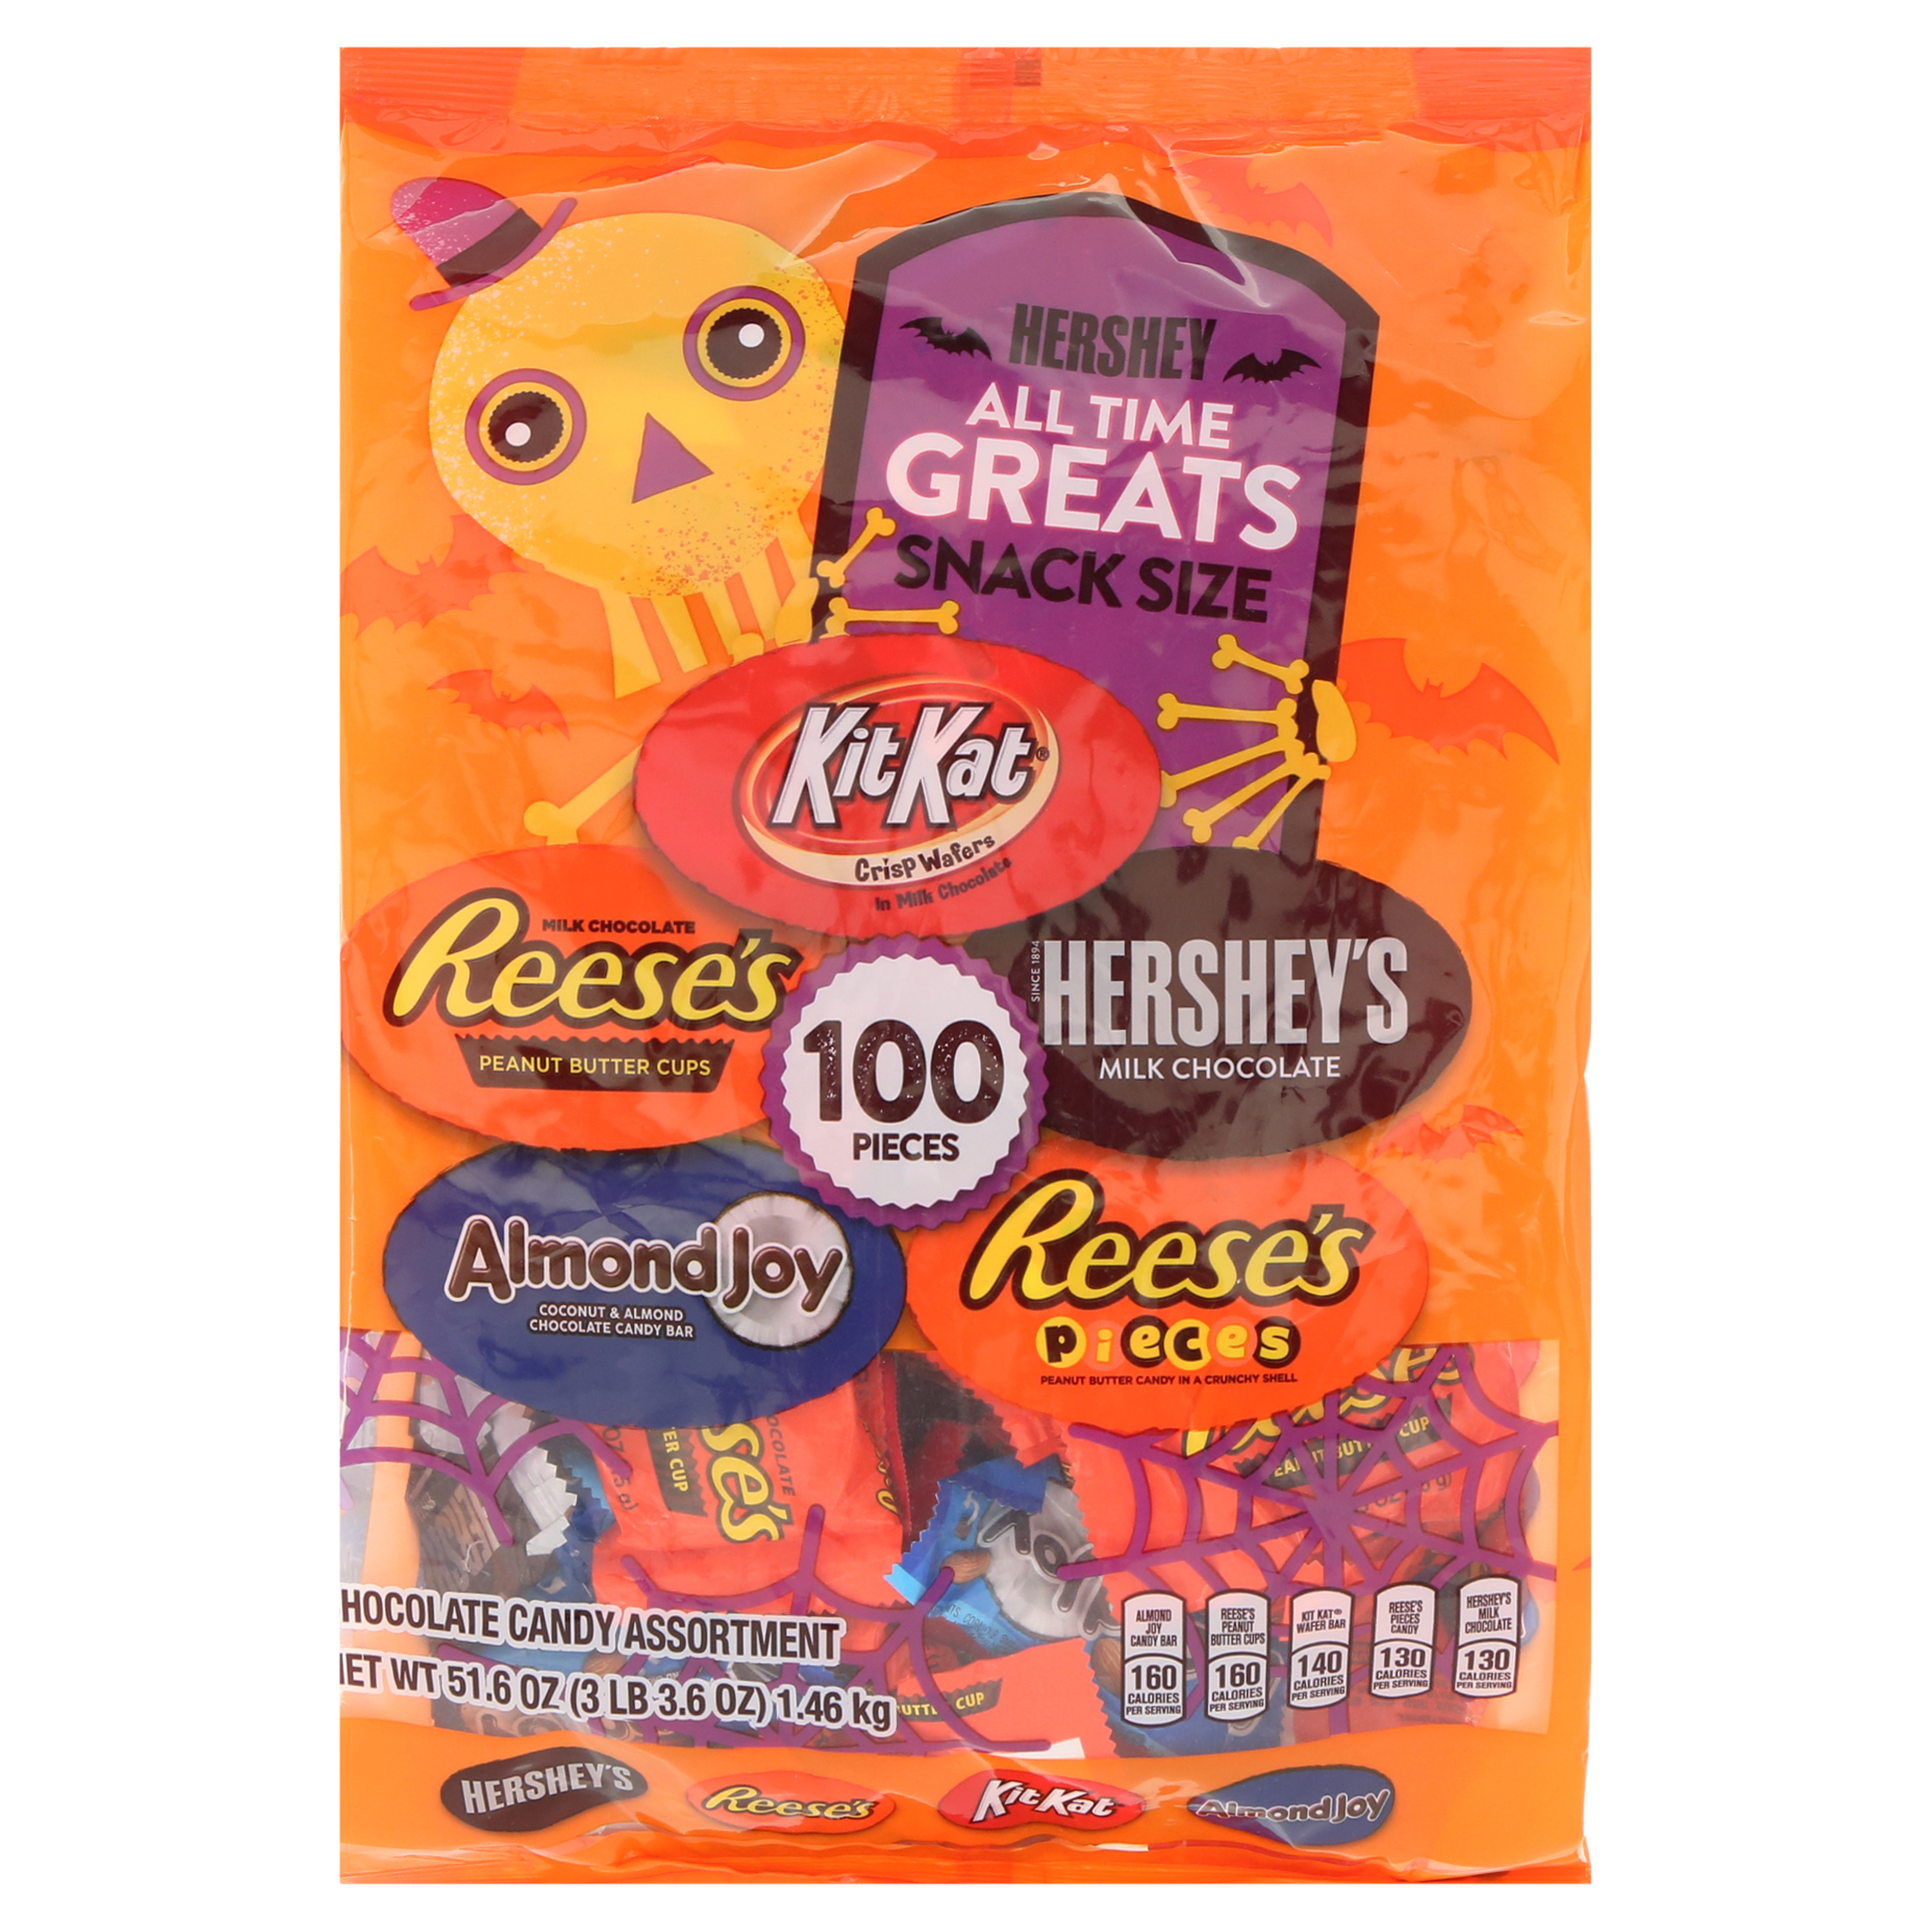 Hershey's Halloween Candy Assortment All Time Greats Snack Size, 51.6 oz, 100 Count - image 11 of 13